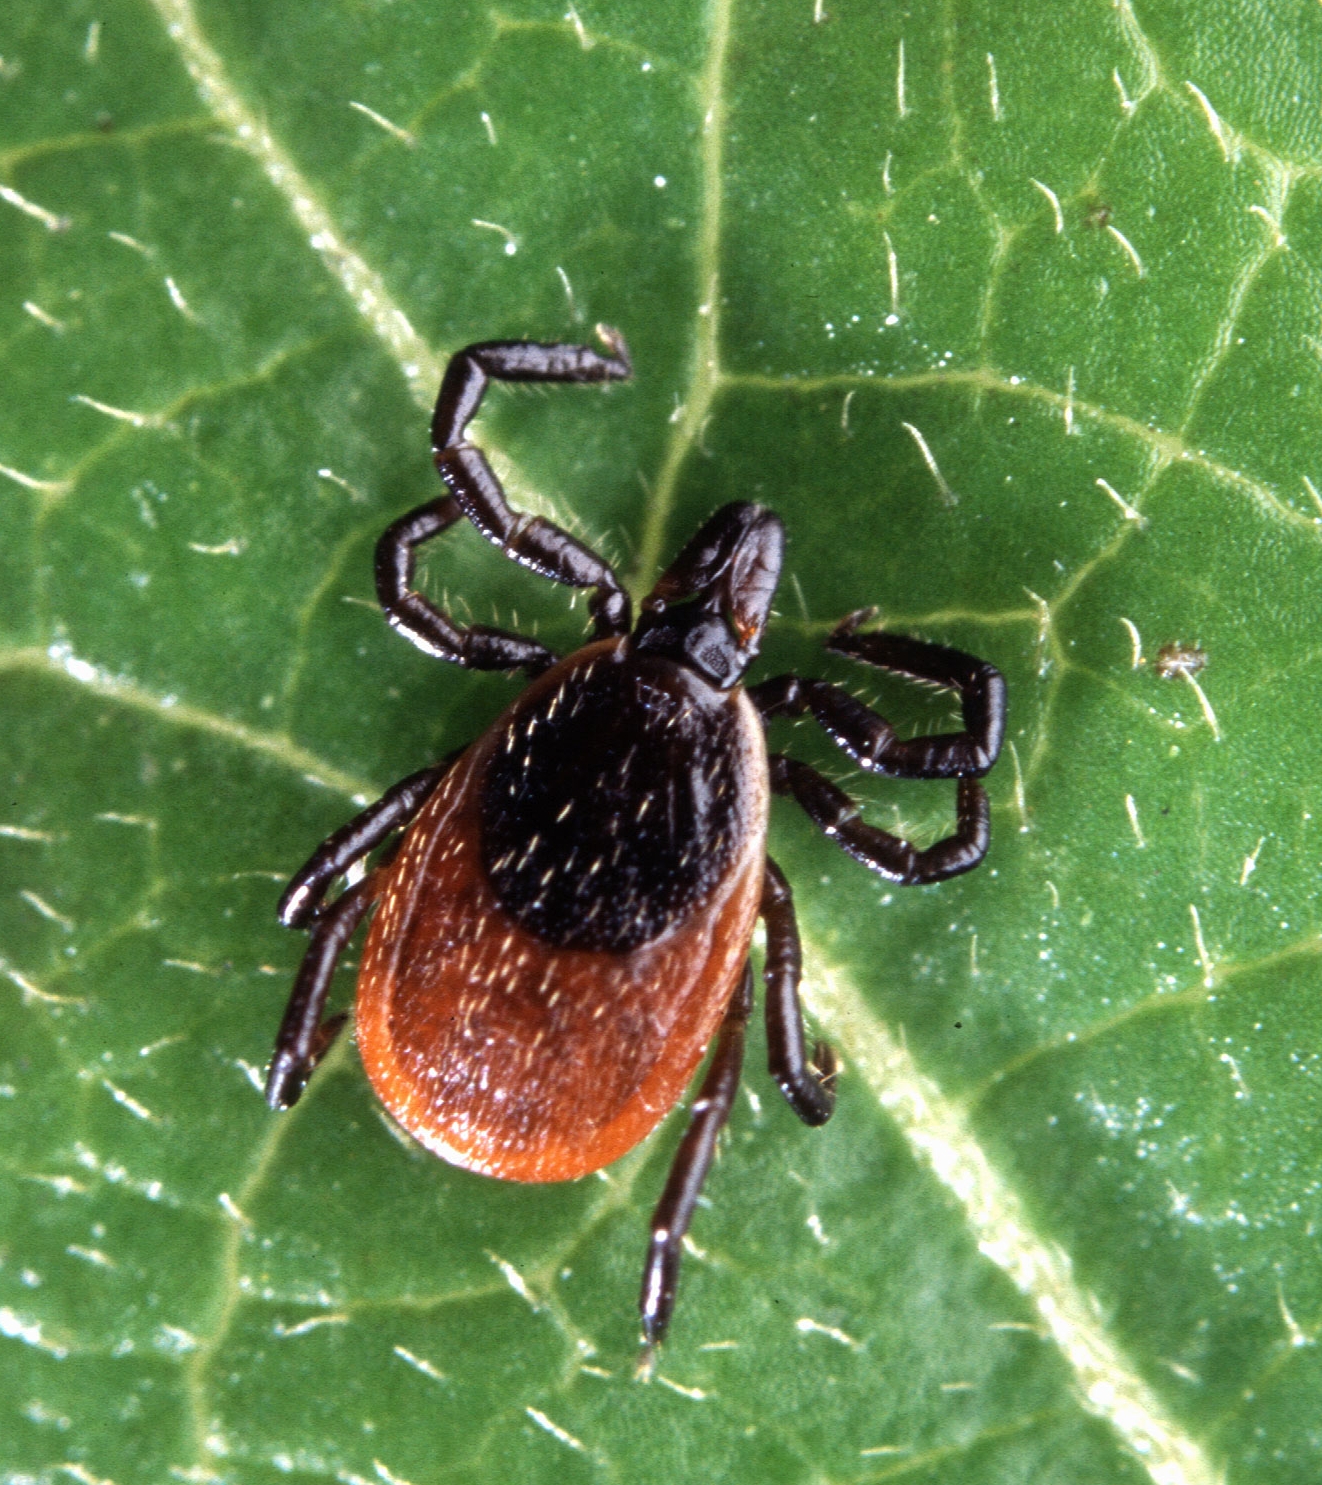 Deer ticks are also called black-legged ticks are carry Lyme and other potentially dangerous diseases.